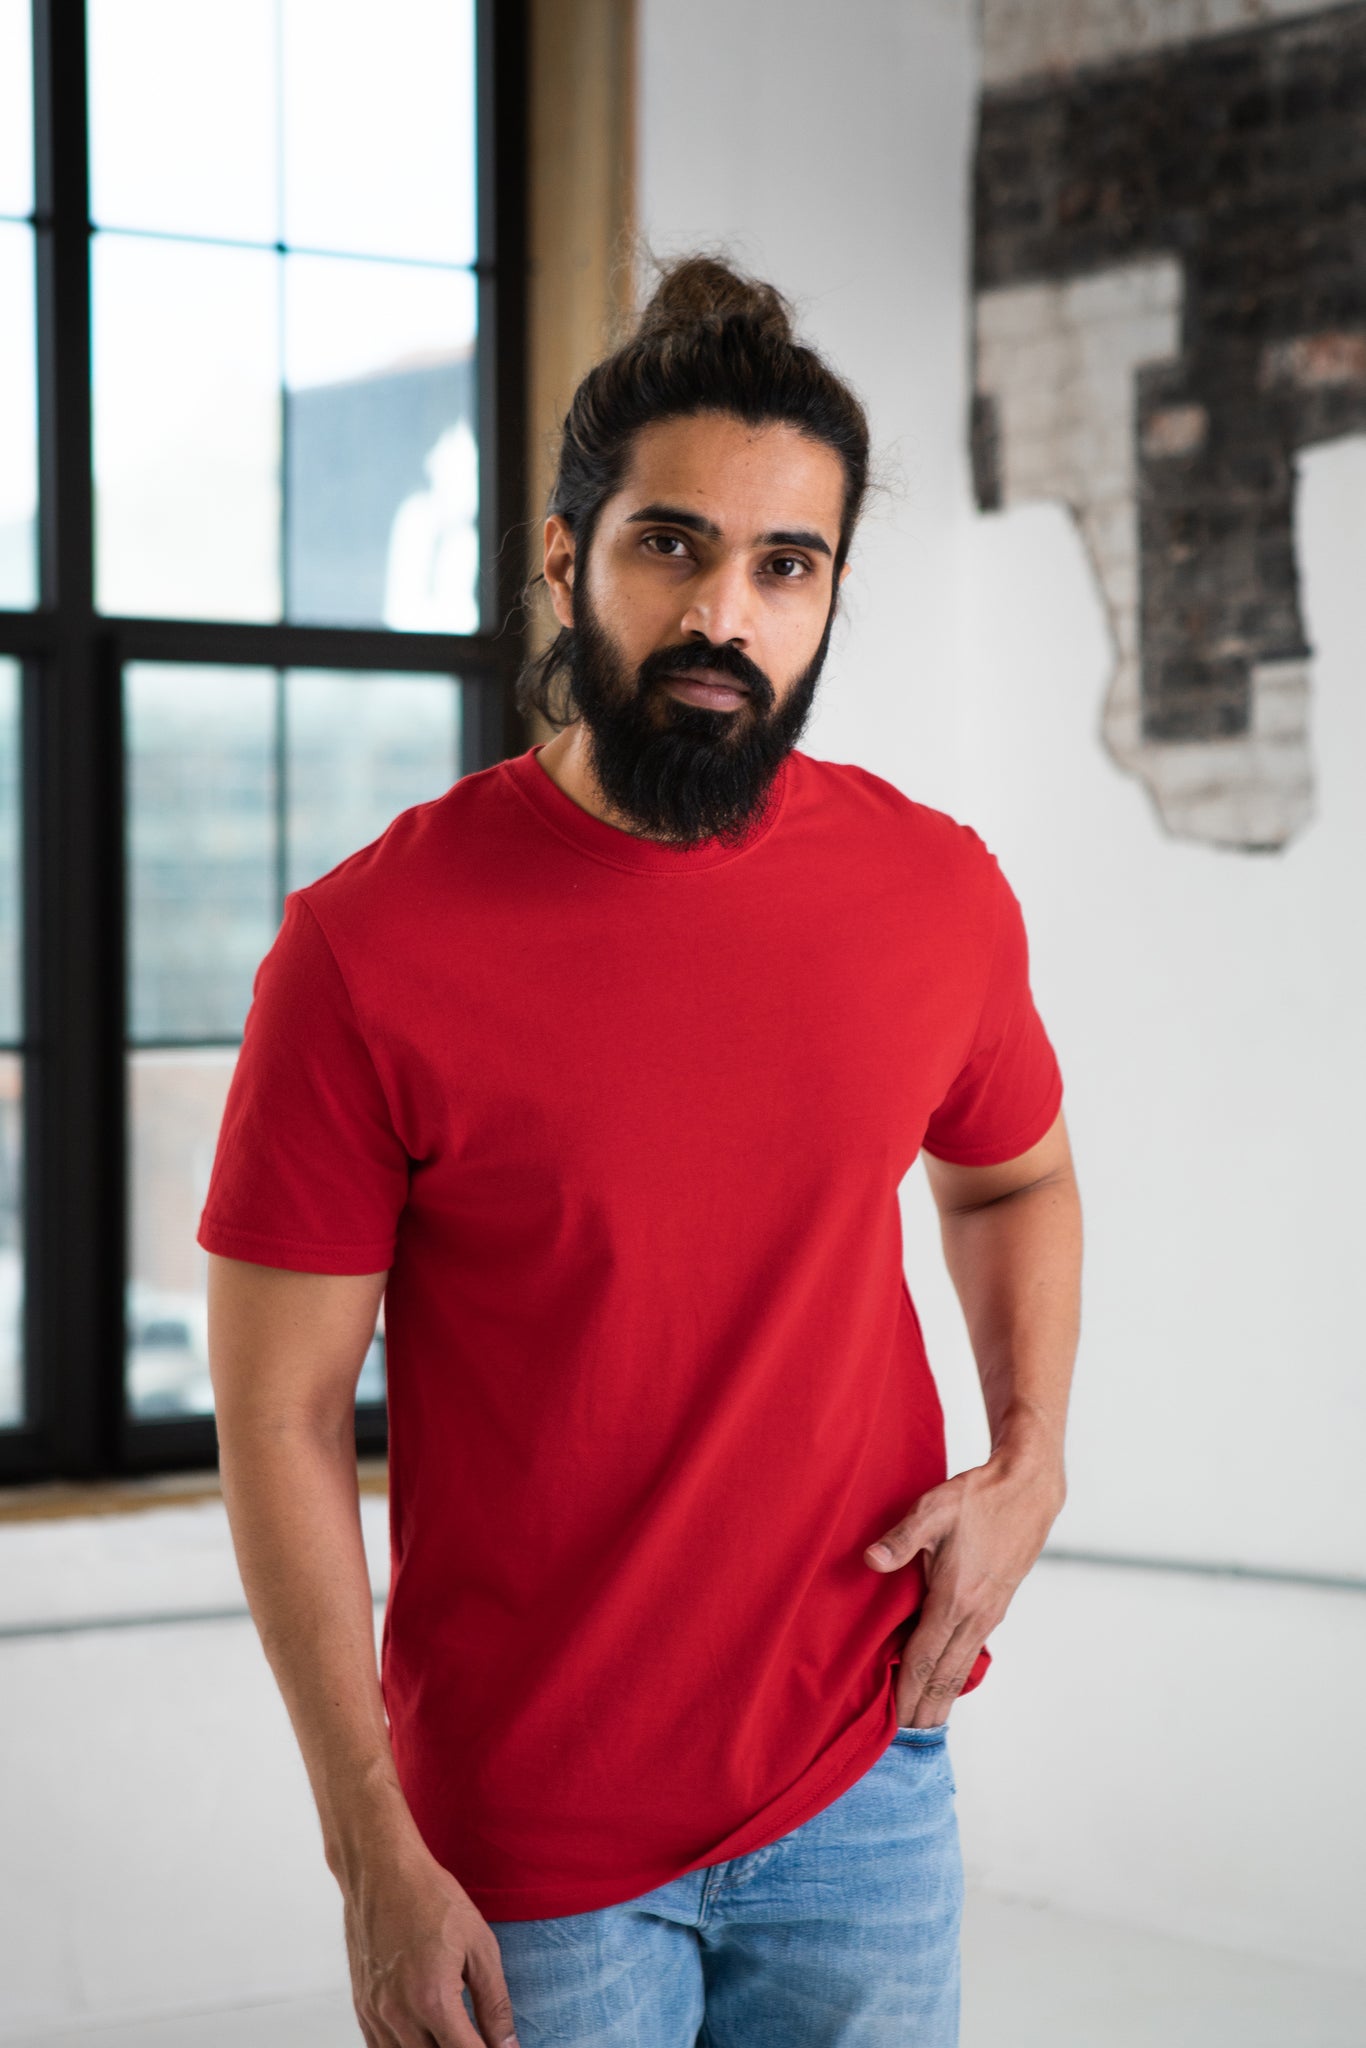 Male Model wearing GOEX Unisex and Men's Premium Cotton Tee in Red